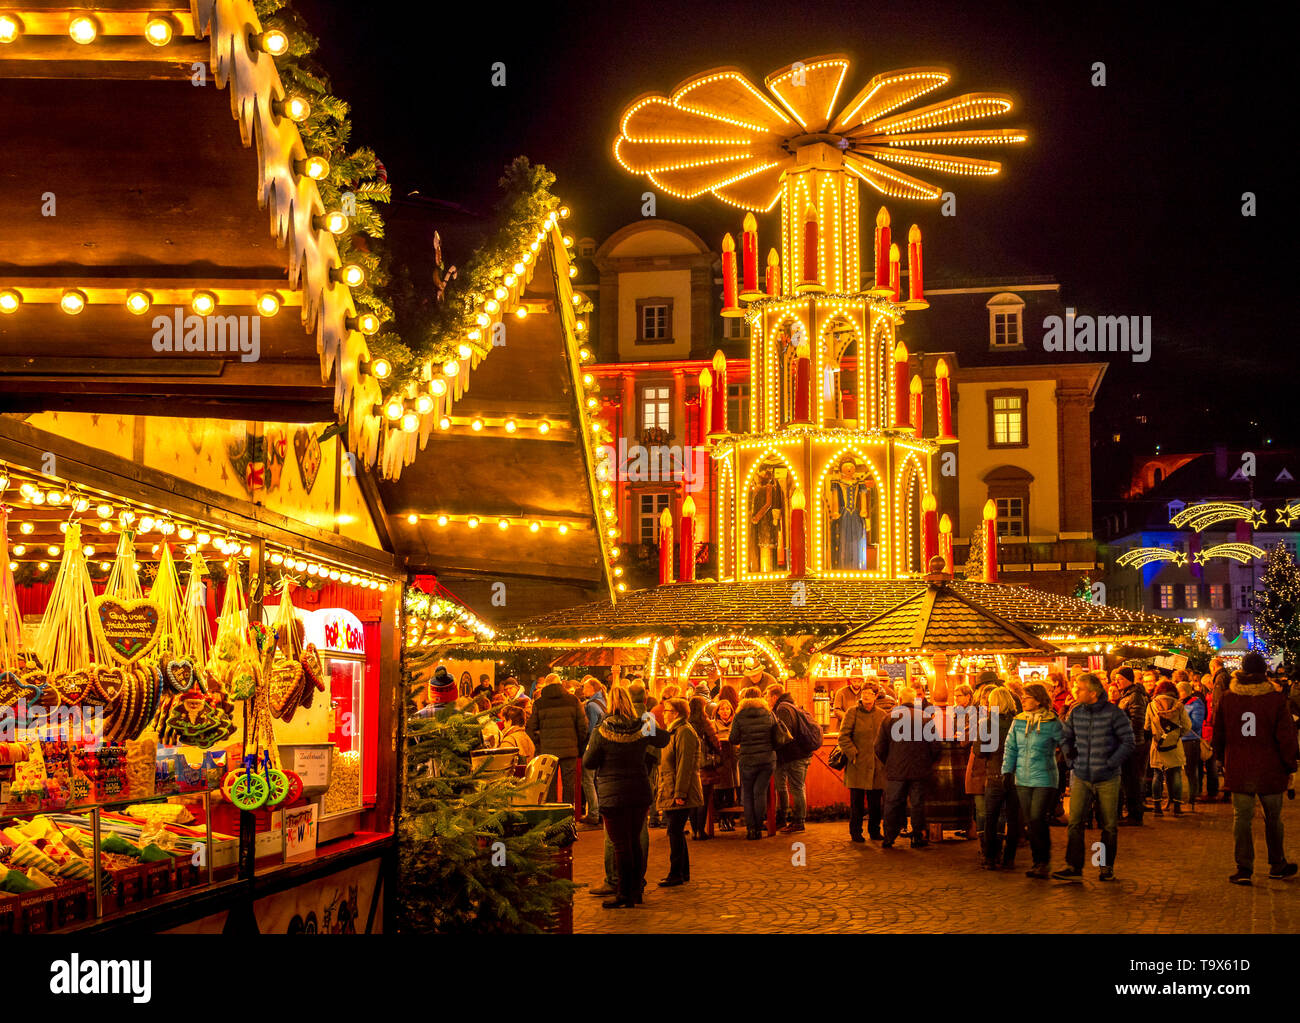 Christmas fair on the marketplace in Heidelberg, Baden-Wurttemberg, Germany, Europe, Weihnachtsmarkt am Marktplatz in Heidelberg, Baden-Württemberg, D Stock Photo